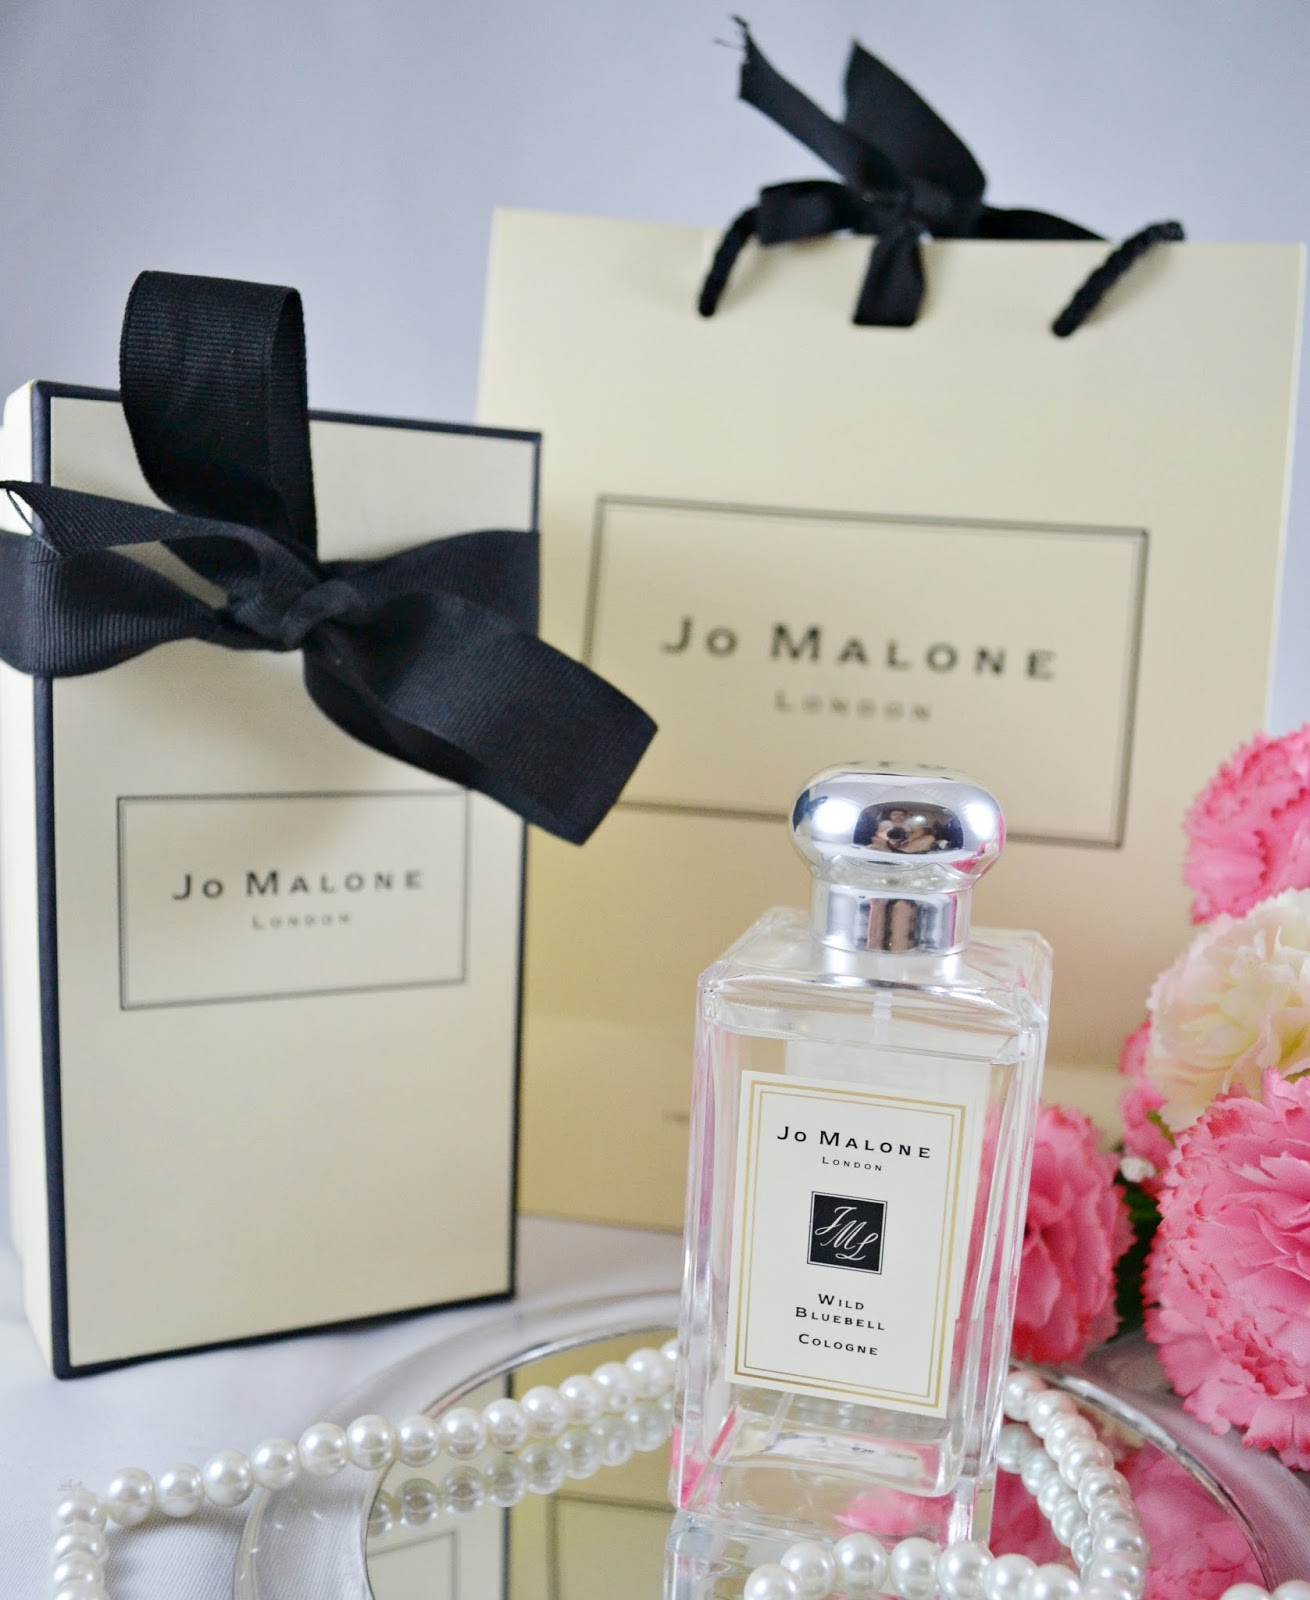 Jo Malone: Wild Bluebell Cologne | All About Beauty 101